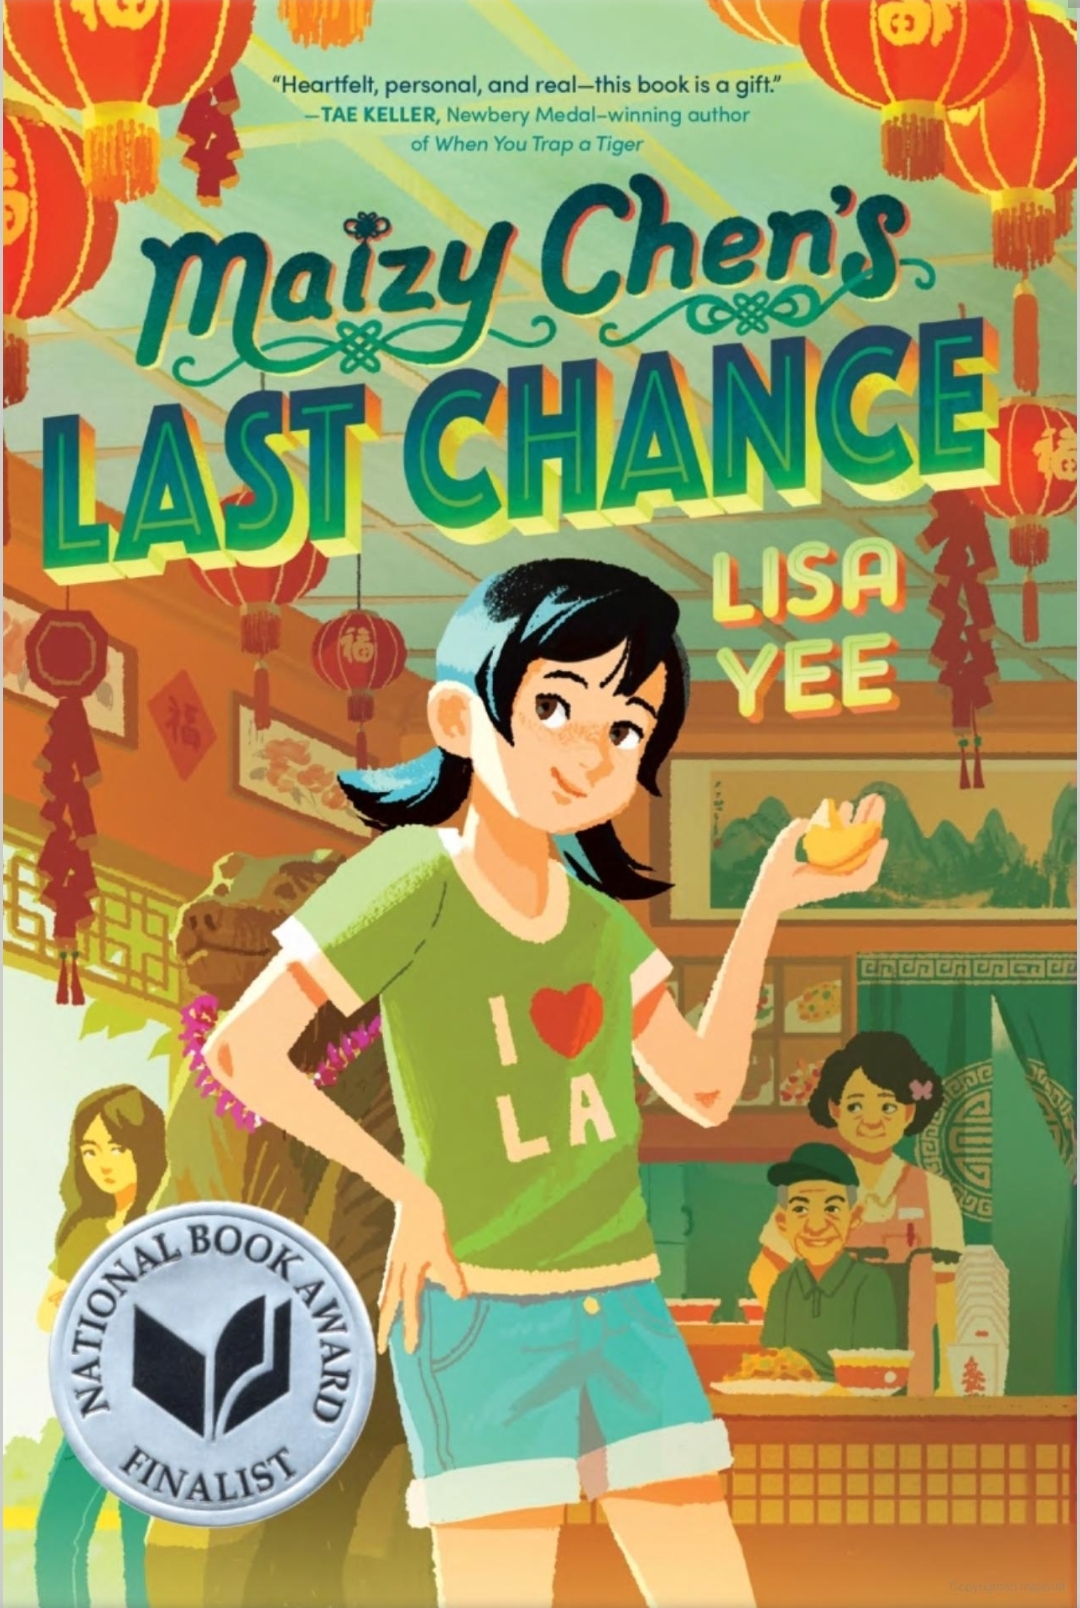 Maizy Chen's Last Chance: A Practice Discussion